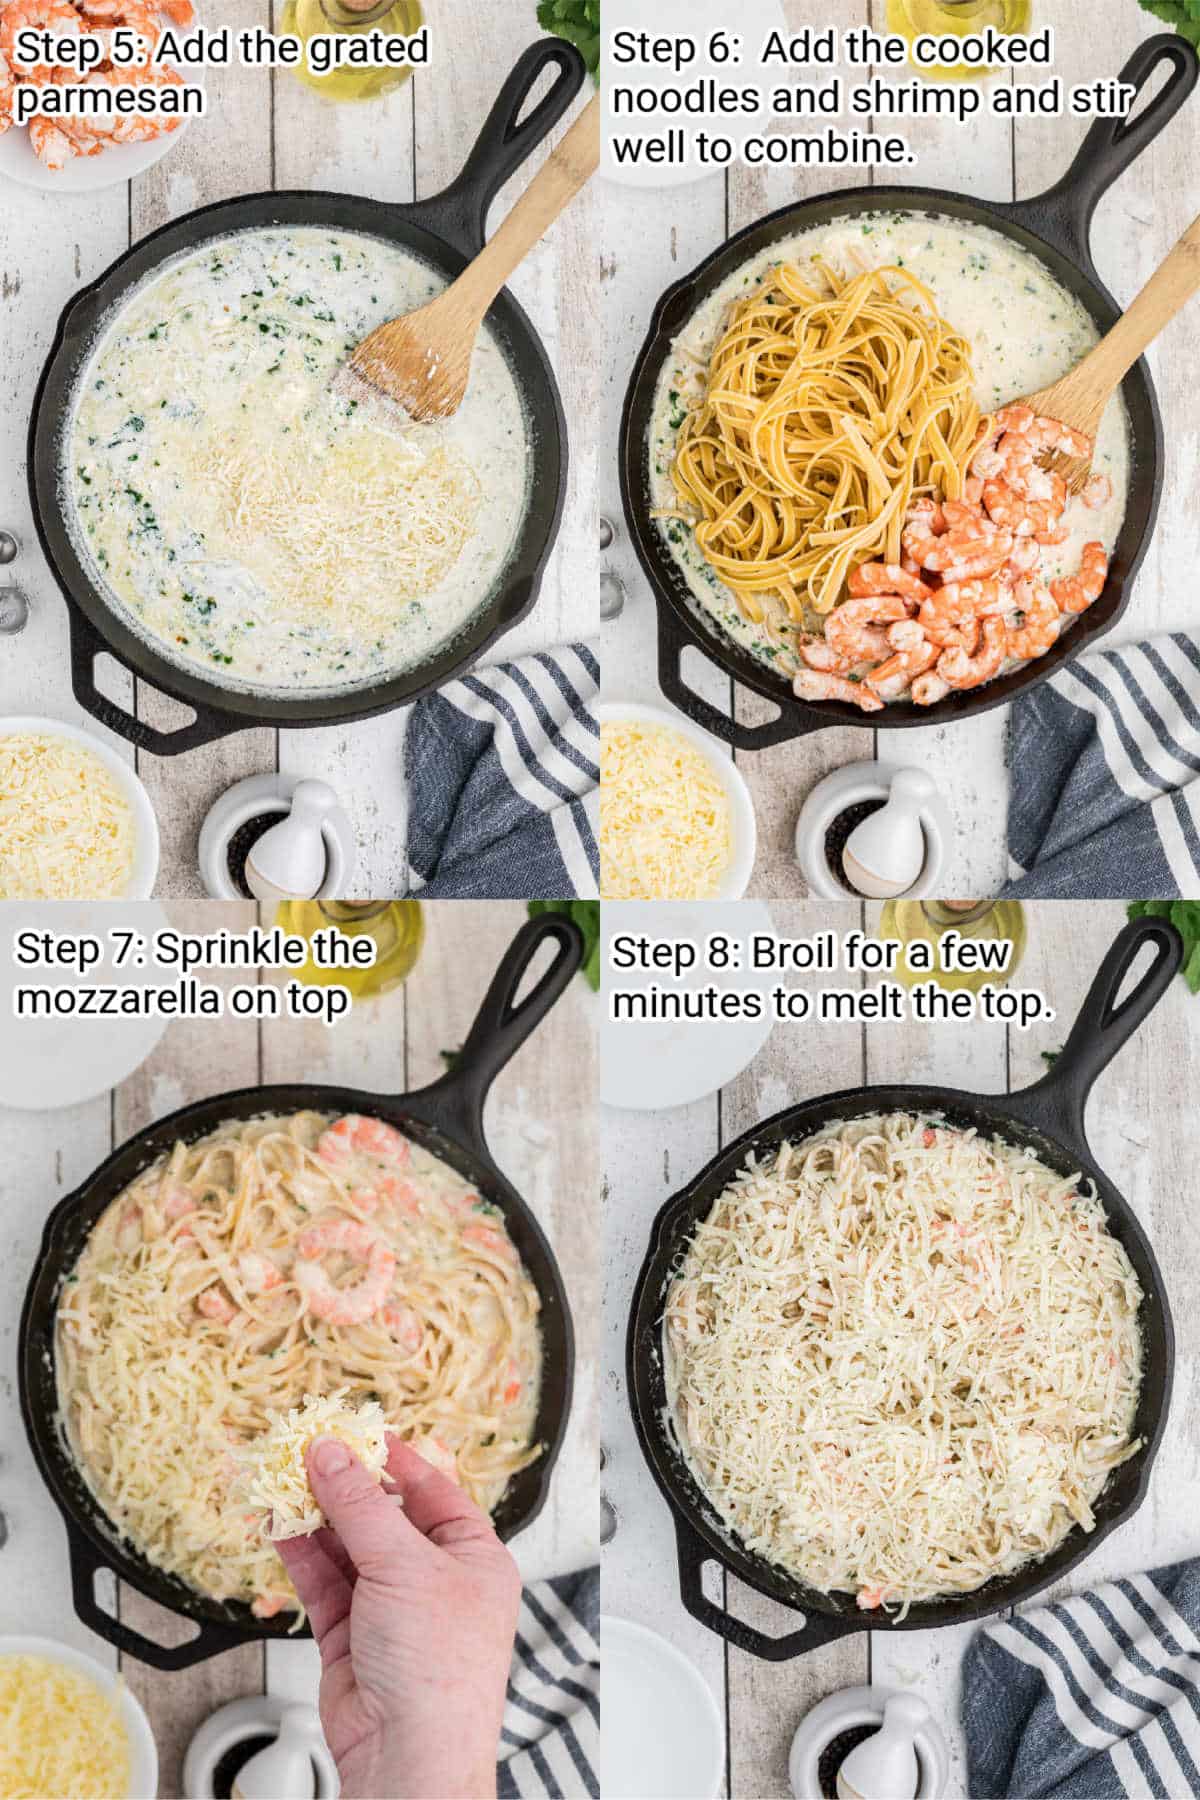 four images showing the next four steps in making the recipe